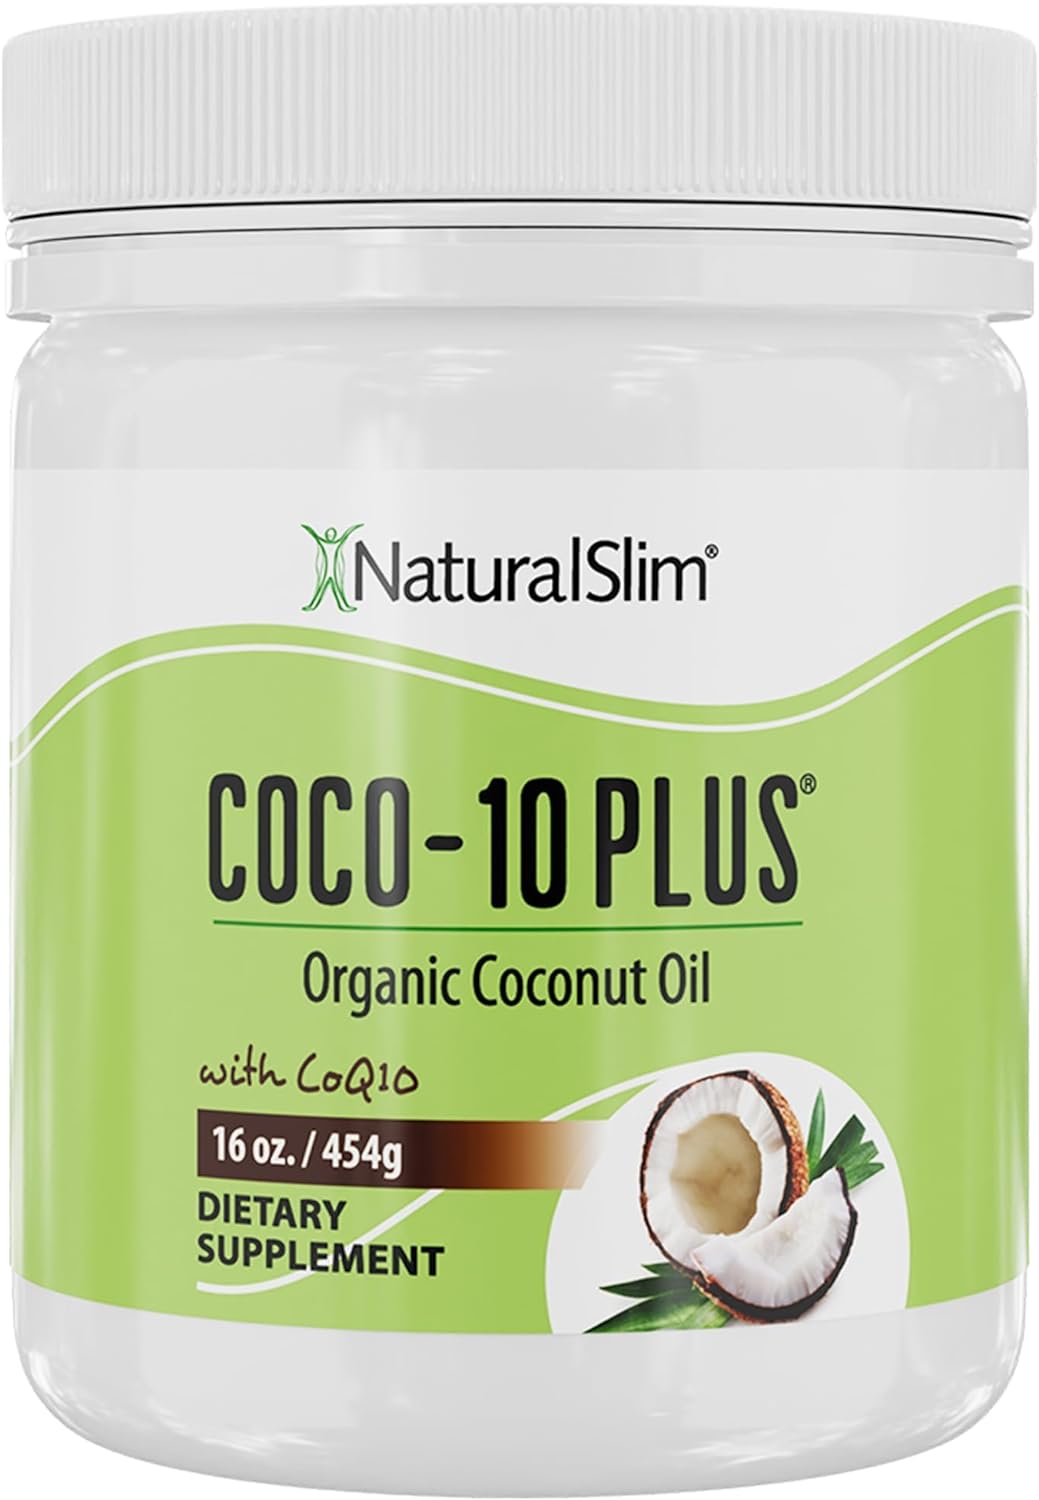 NaturalSlim Coco10 Plus with CoQ10 - Organic Coconut Oil for Cooking, Baking, Mixing with Shake or Coffee - Fresh Flavor - 16 oz